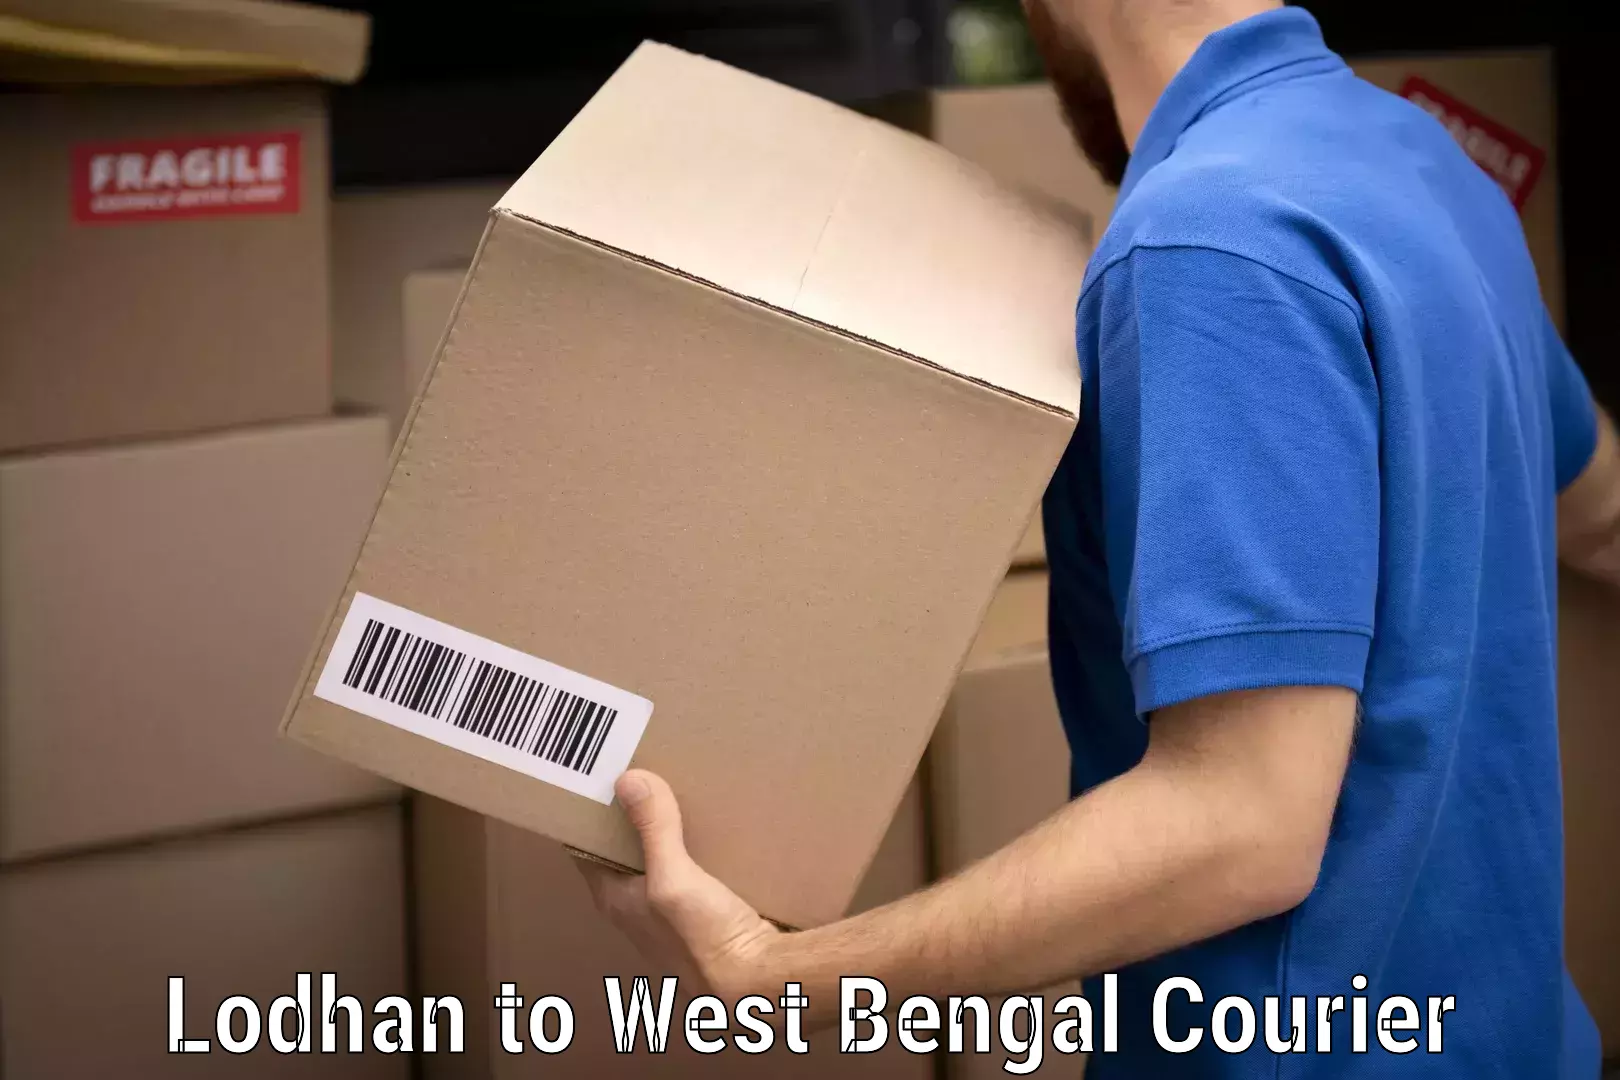 Efficient relocation services Lodhan to West Bengal